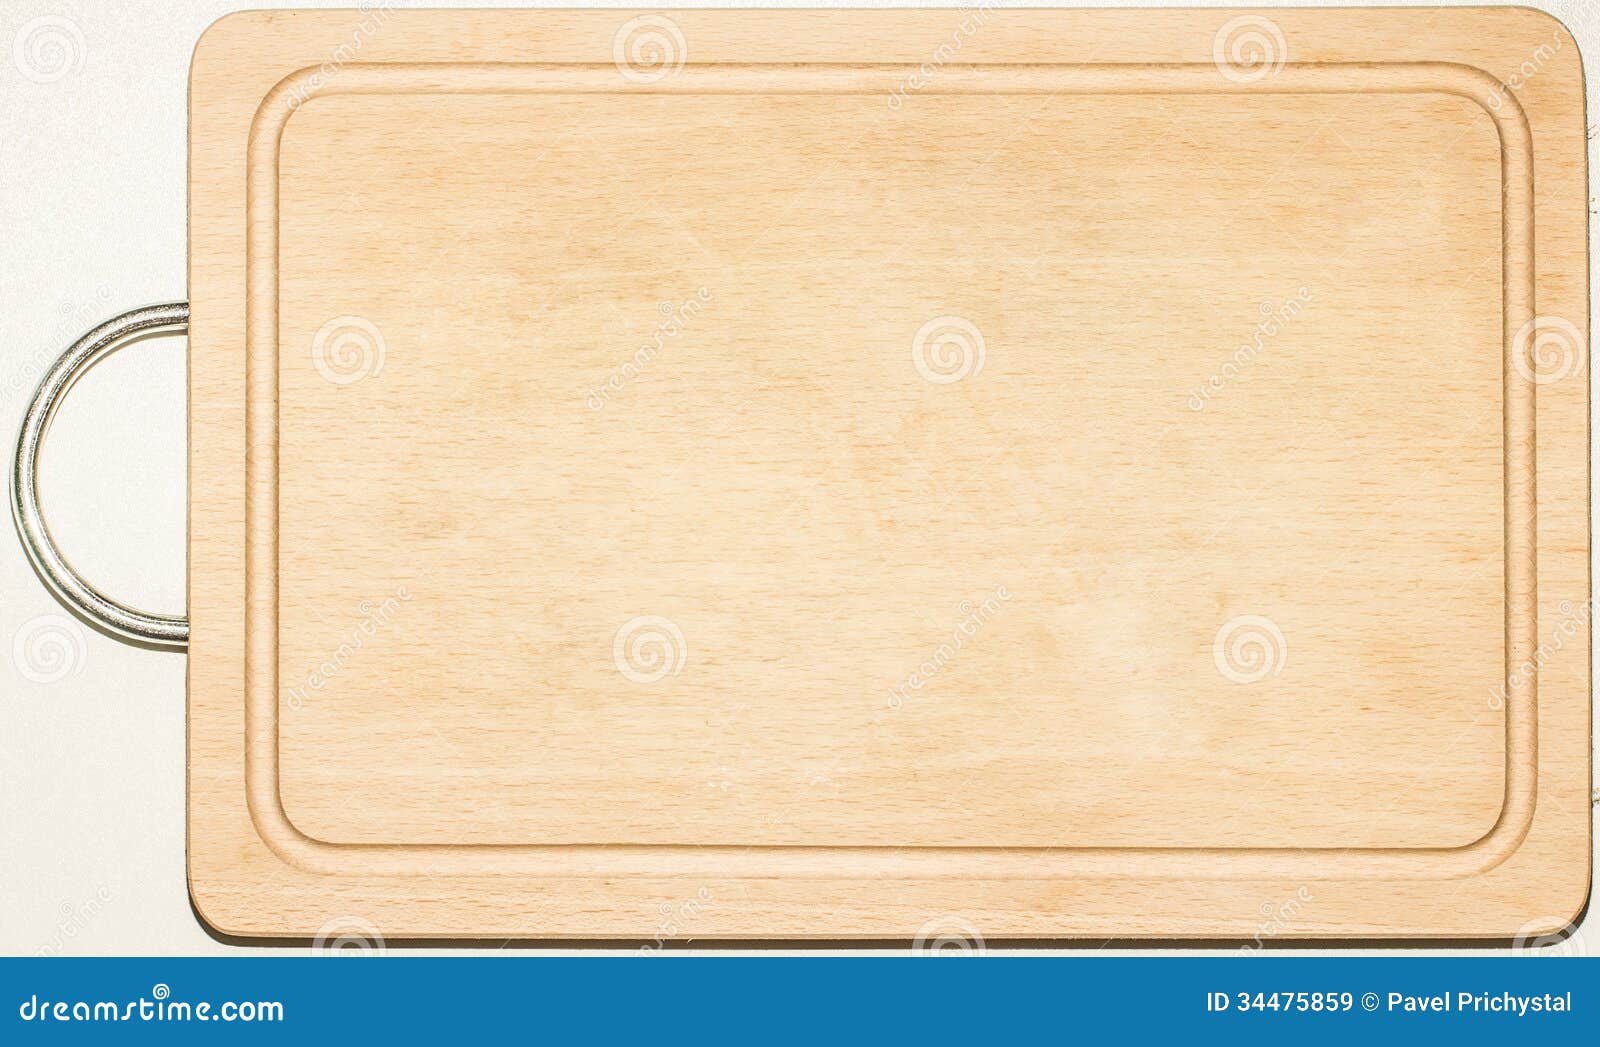 Cutting Board Royalty Free Stock Images - Image: 34475859